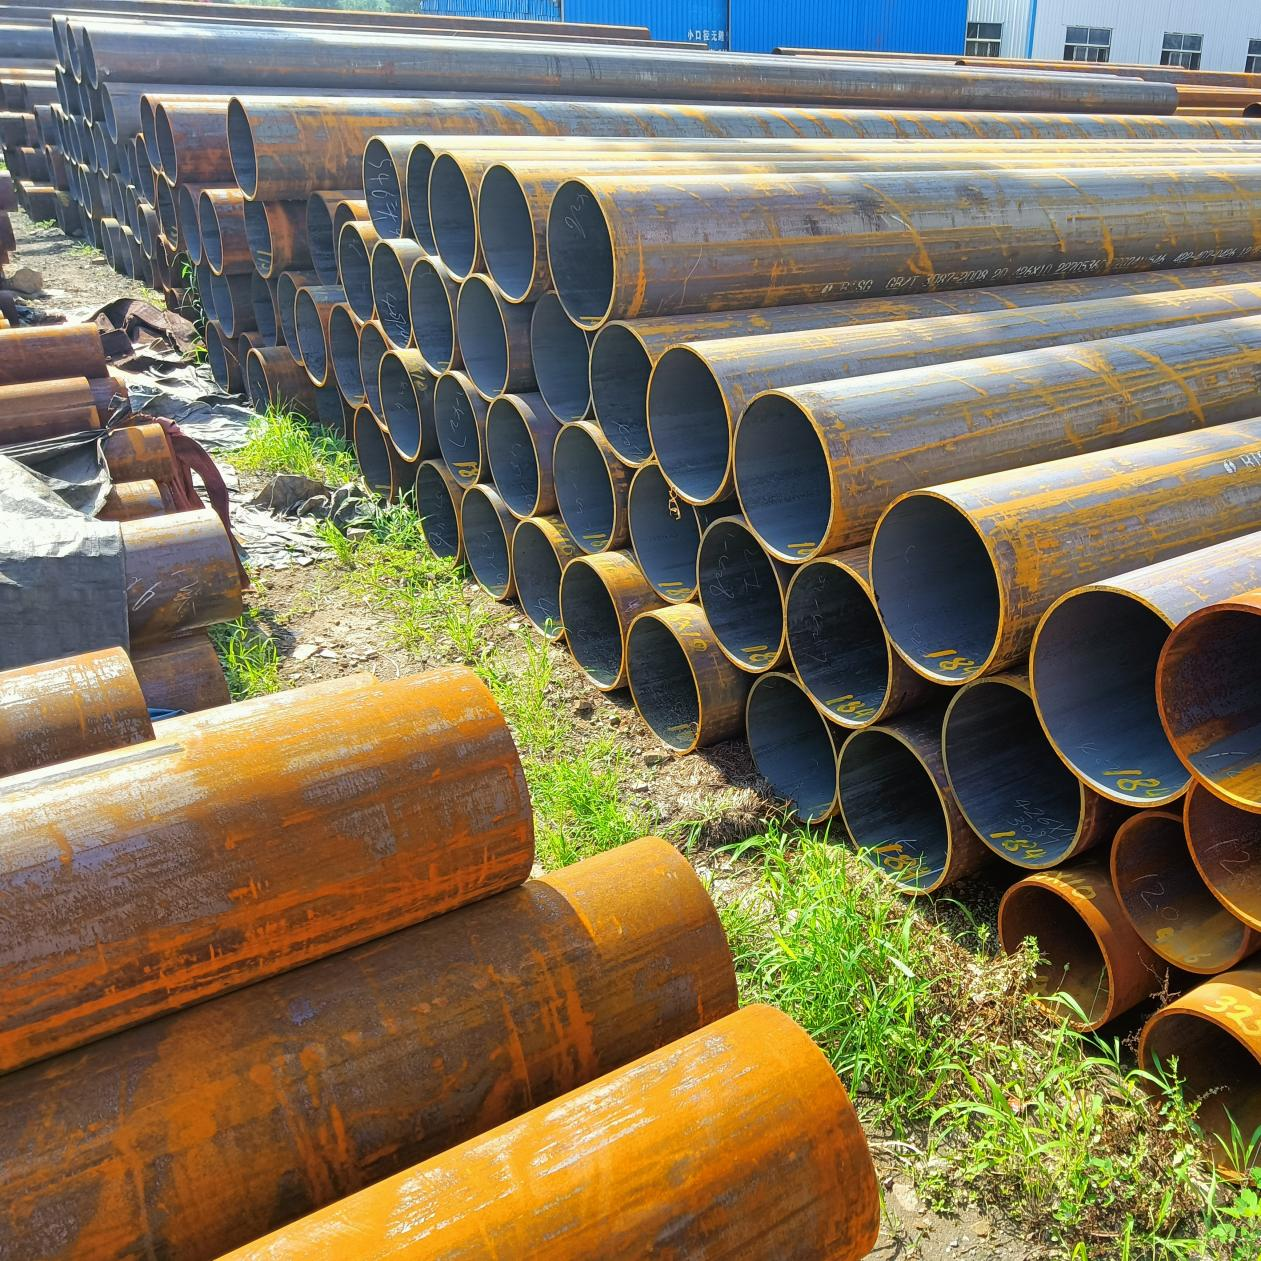 What is seamless steel pipe? Where are they used?